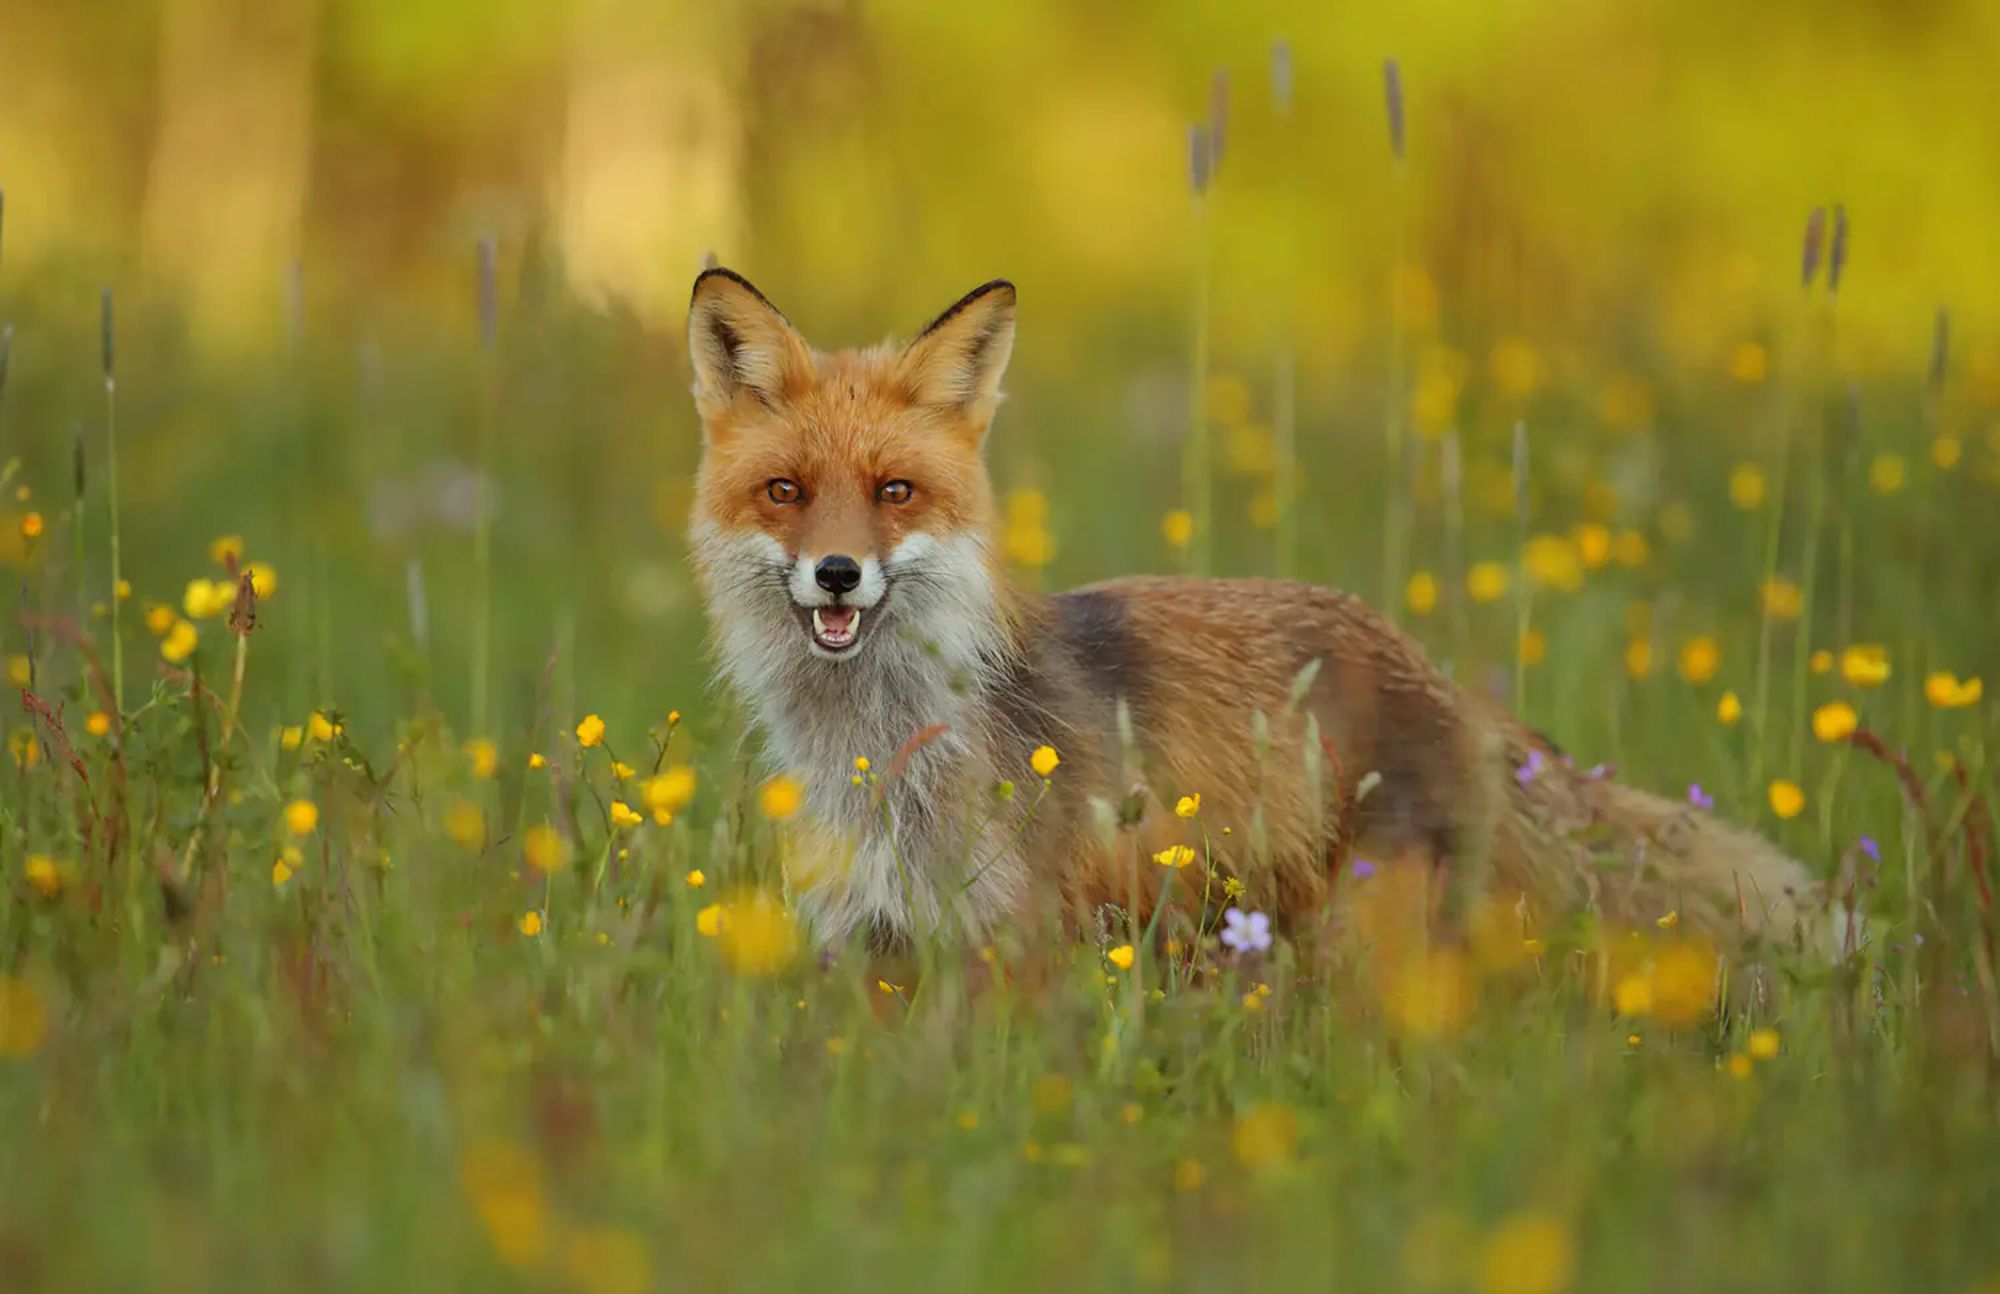 The red fox is staring at the camera and opening its long snouts in the middle of the grassland